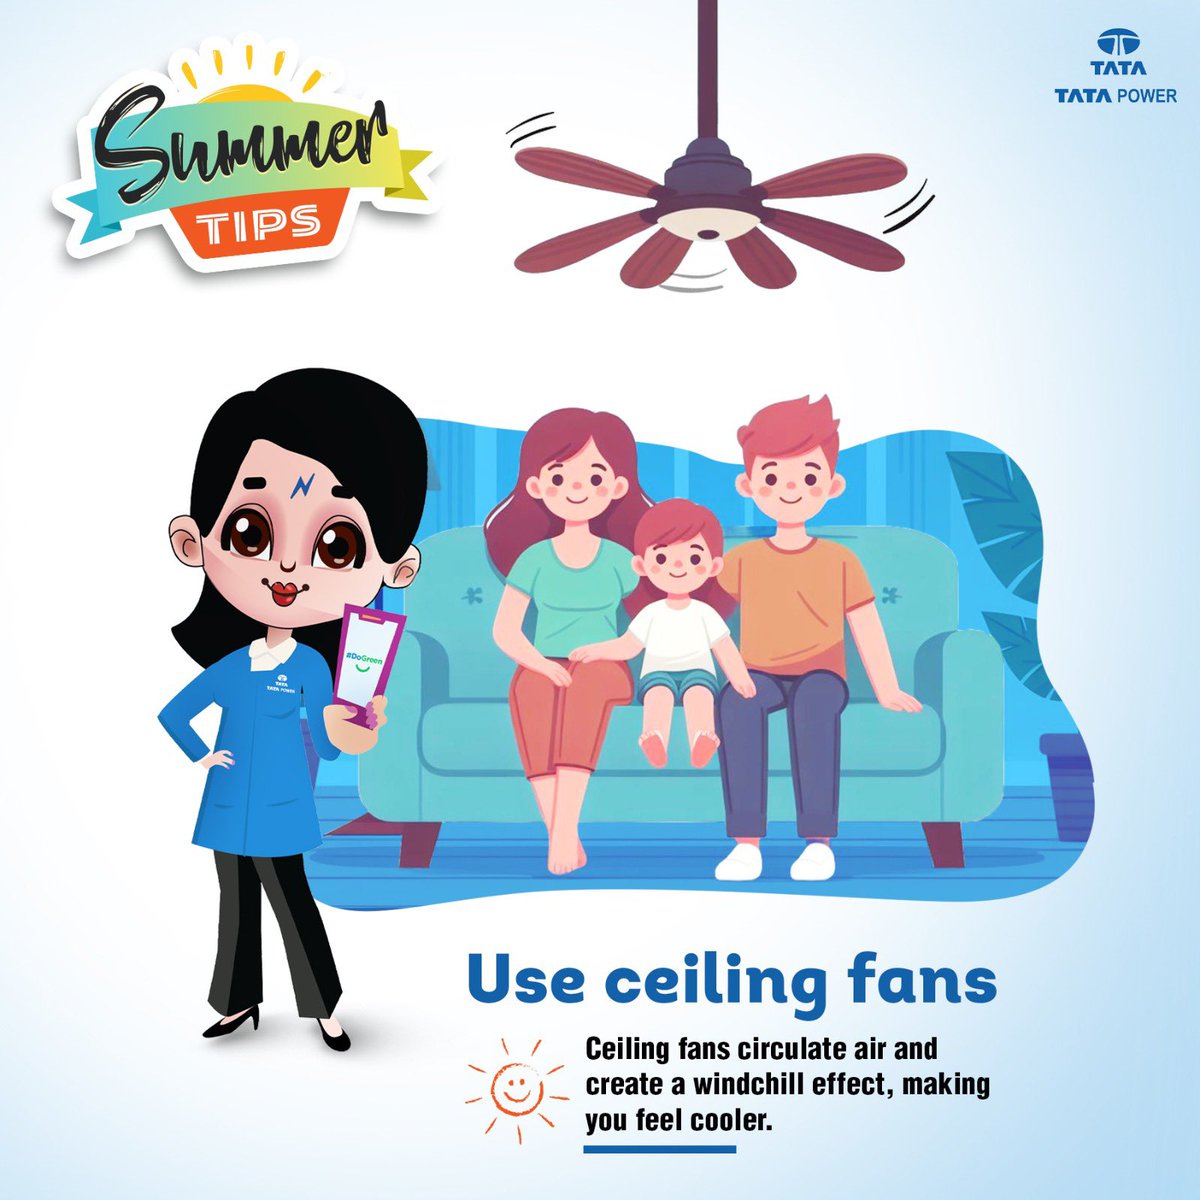 Feeling the heat turned up this summer?  Don’t sweat it!  Beat the heat and save money with these easy energy-saving tips. Switch on your ceiling fans to create a cooling effect. Stay cool and keep your wallet happy this summer!

#TataPower #ThisIsTataPower #SummerTips